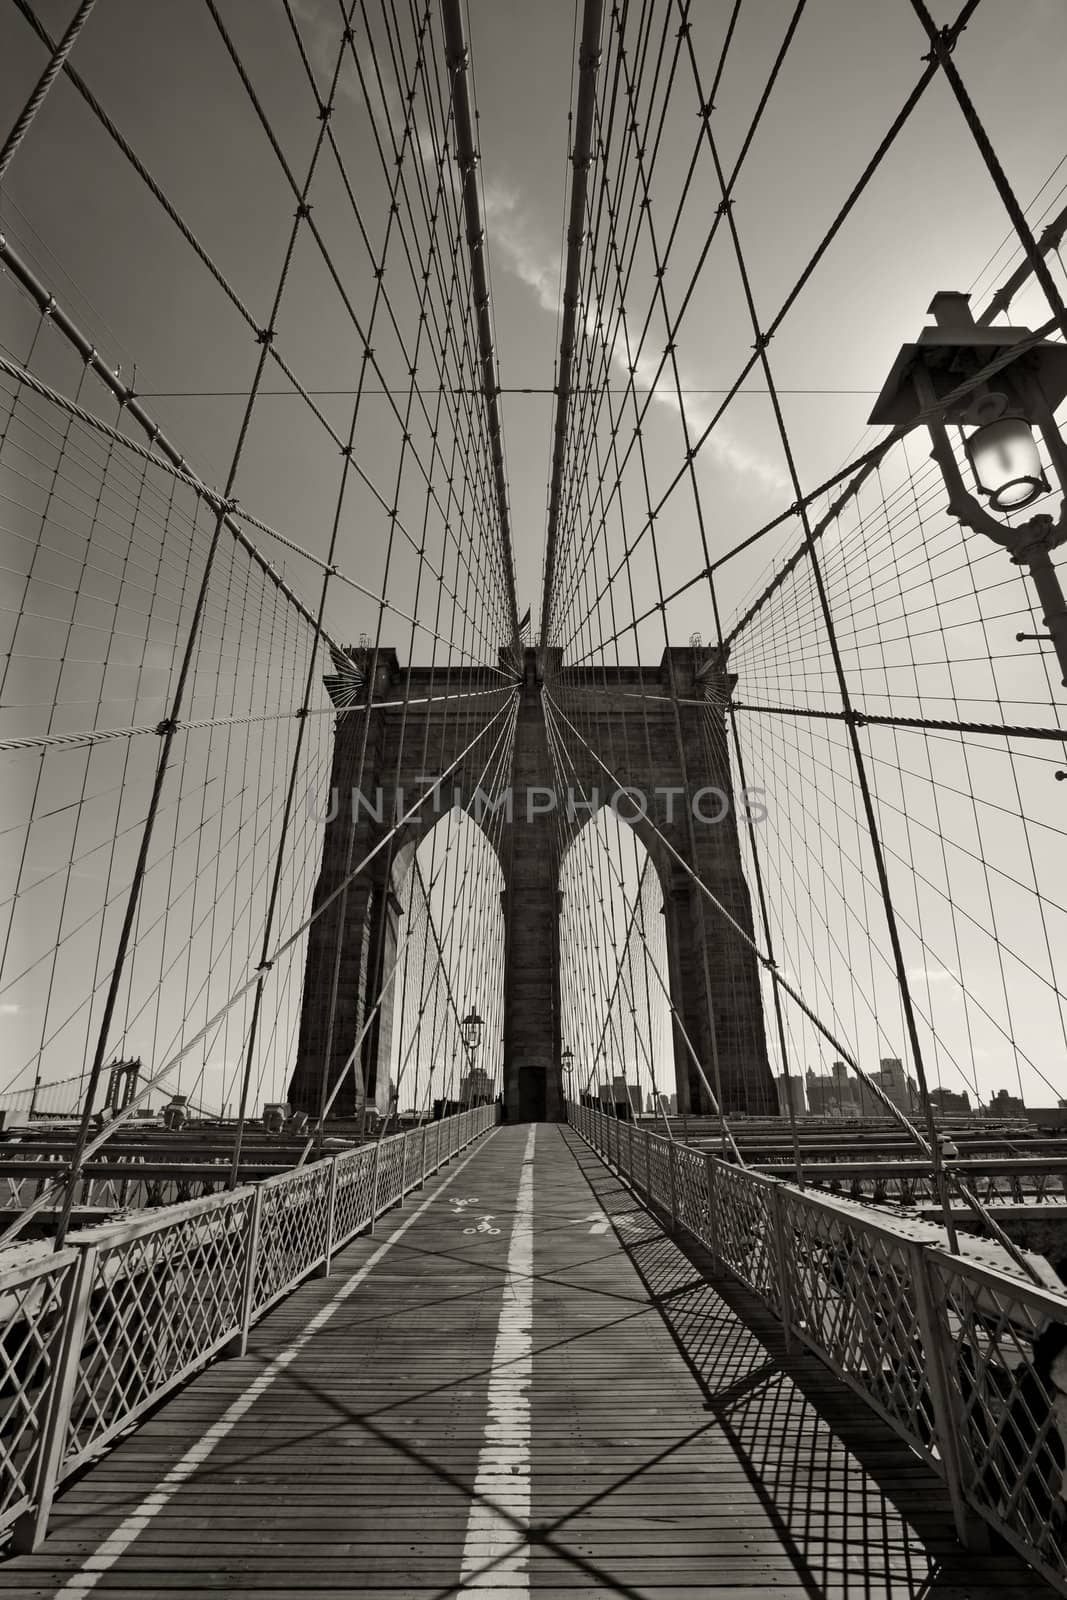 Photo of the Brooklyn Bridge in New York city done in black and white.
